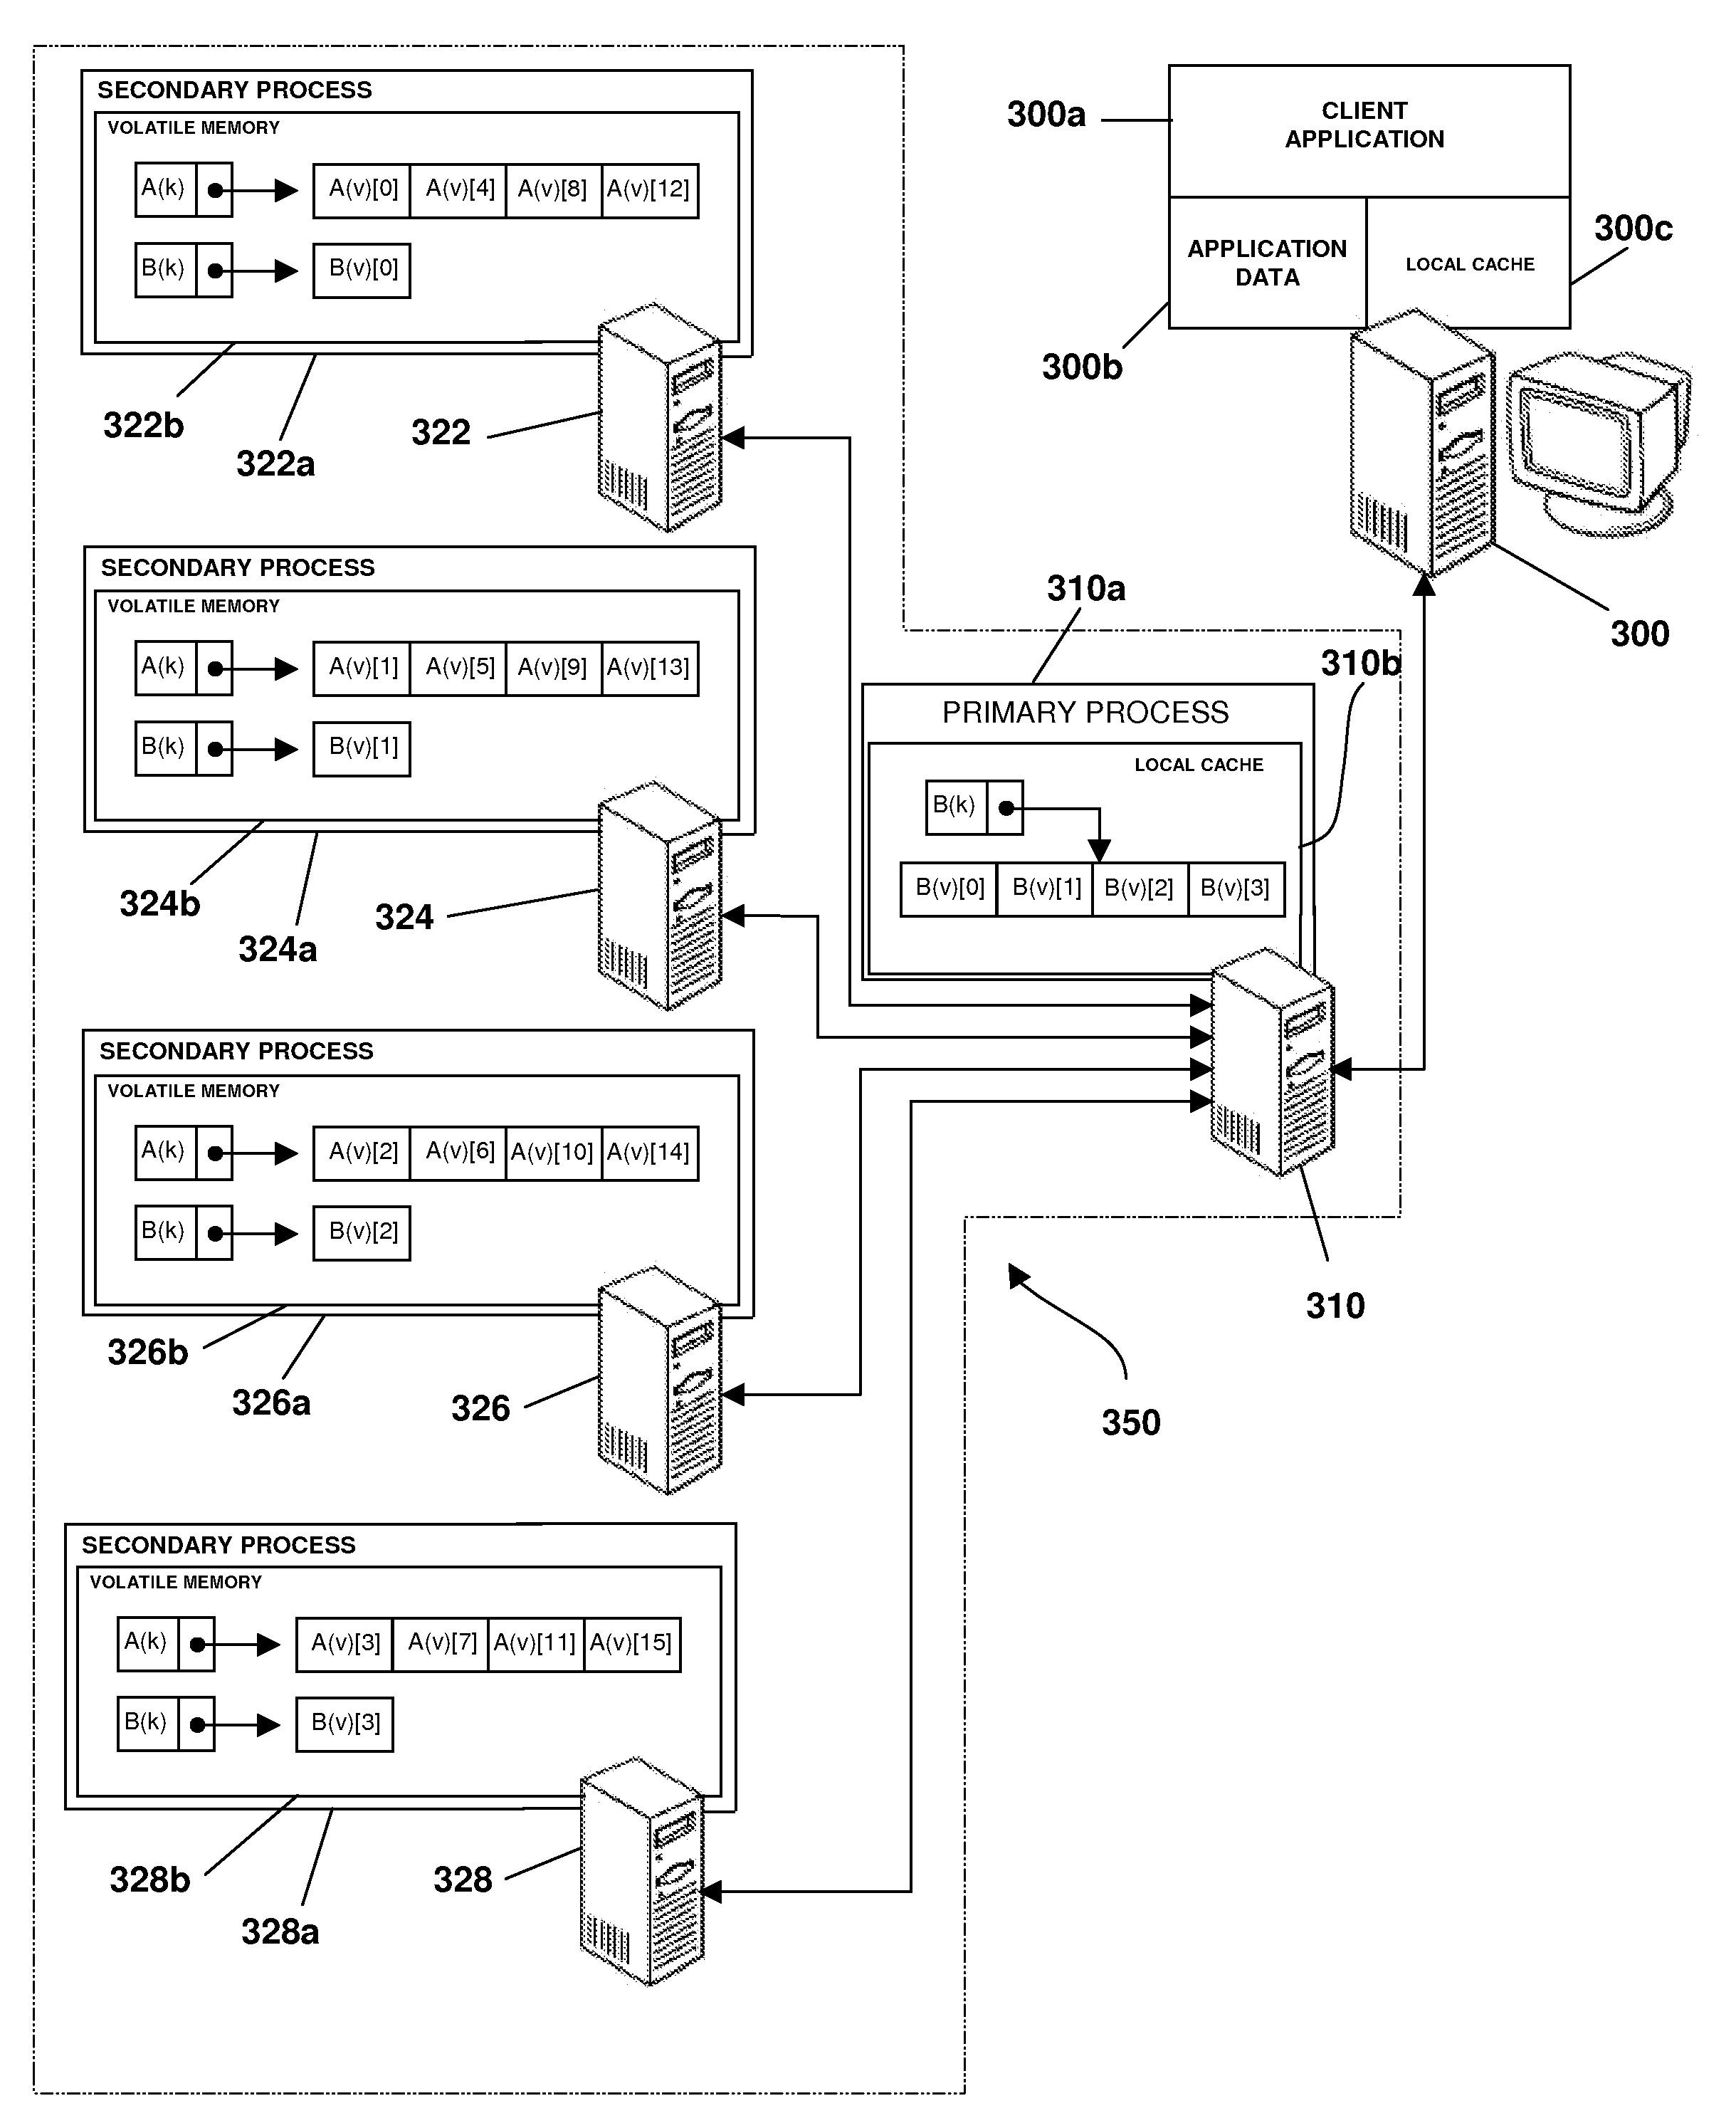 Map Based Striping of Data in a Distributed Volatile Memory Environment